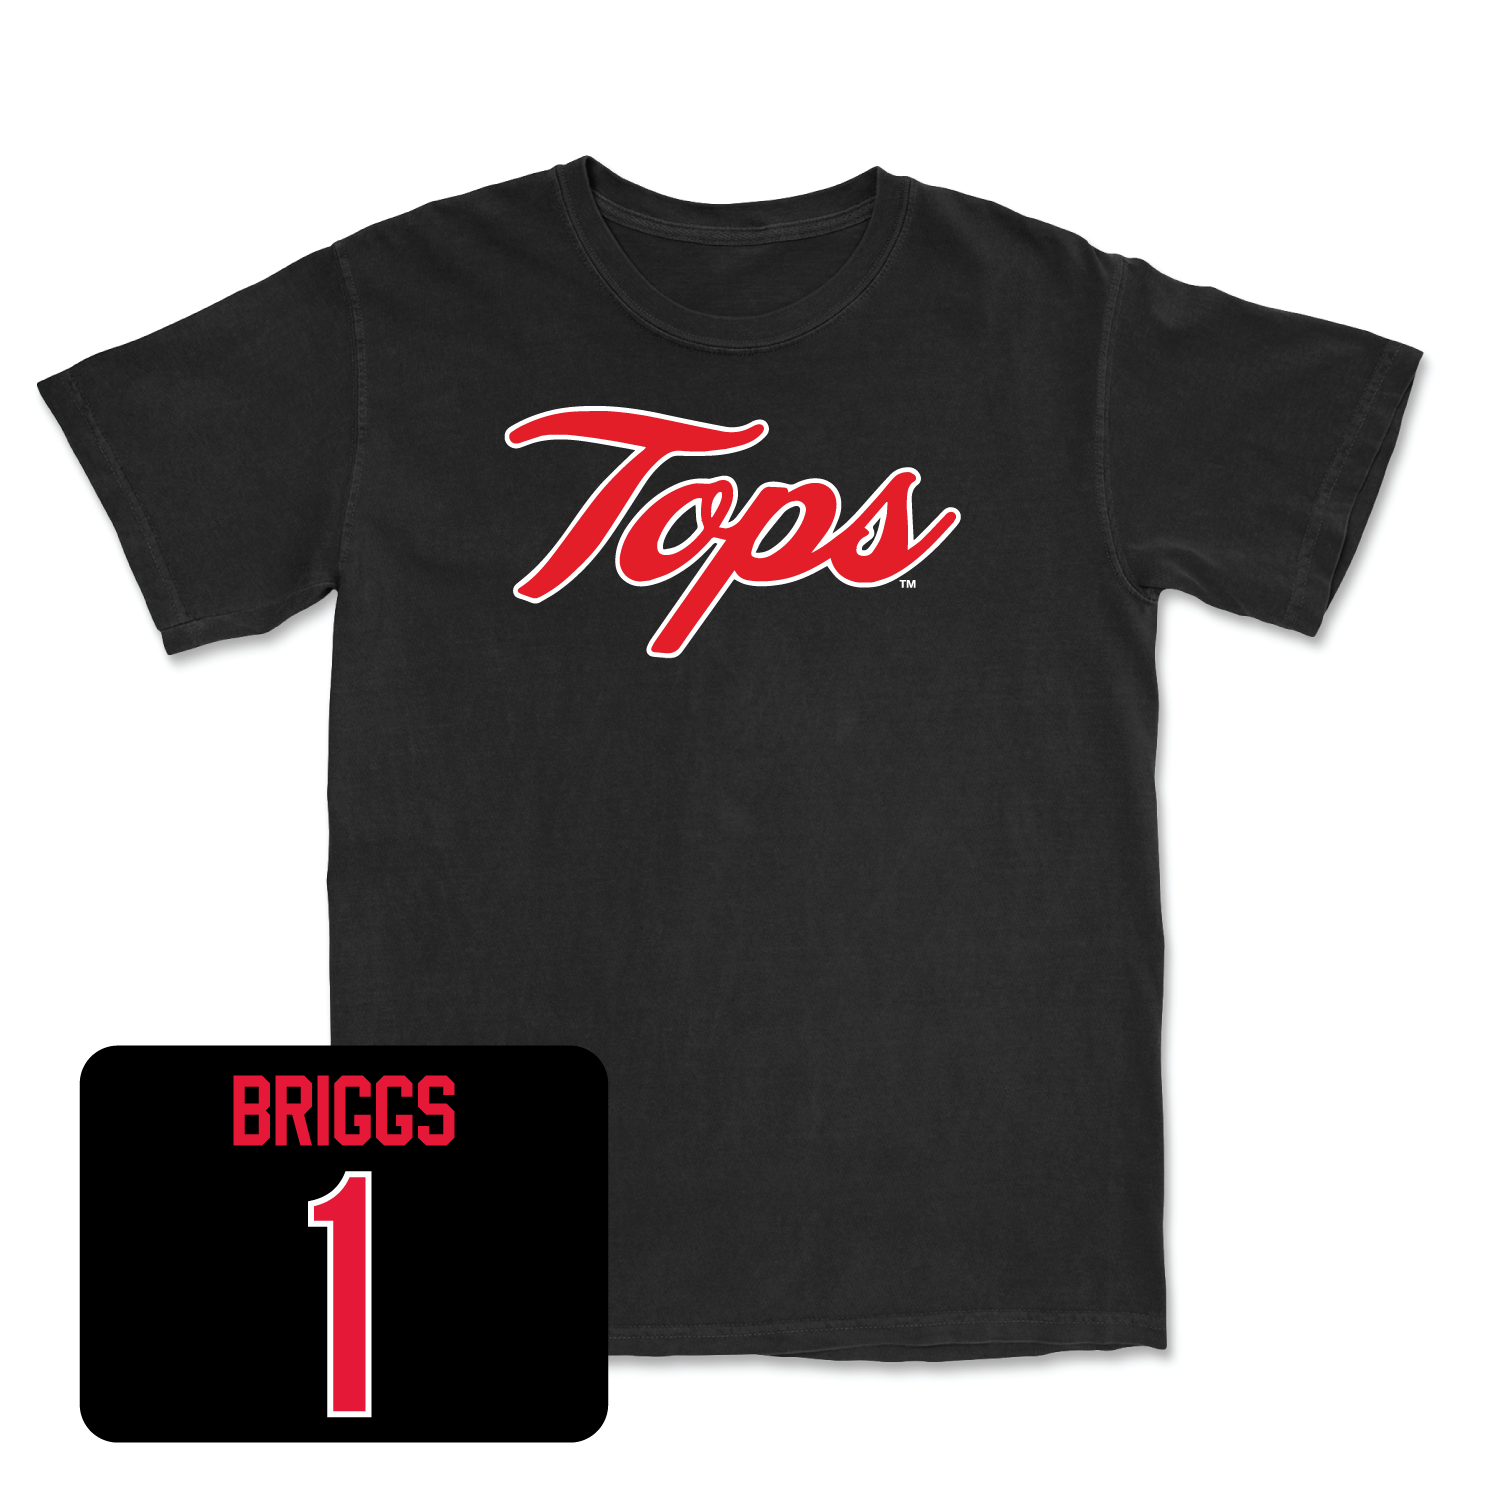 Black Women's Volleyball Tops Tee X-Large / Paige Briggs | #1